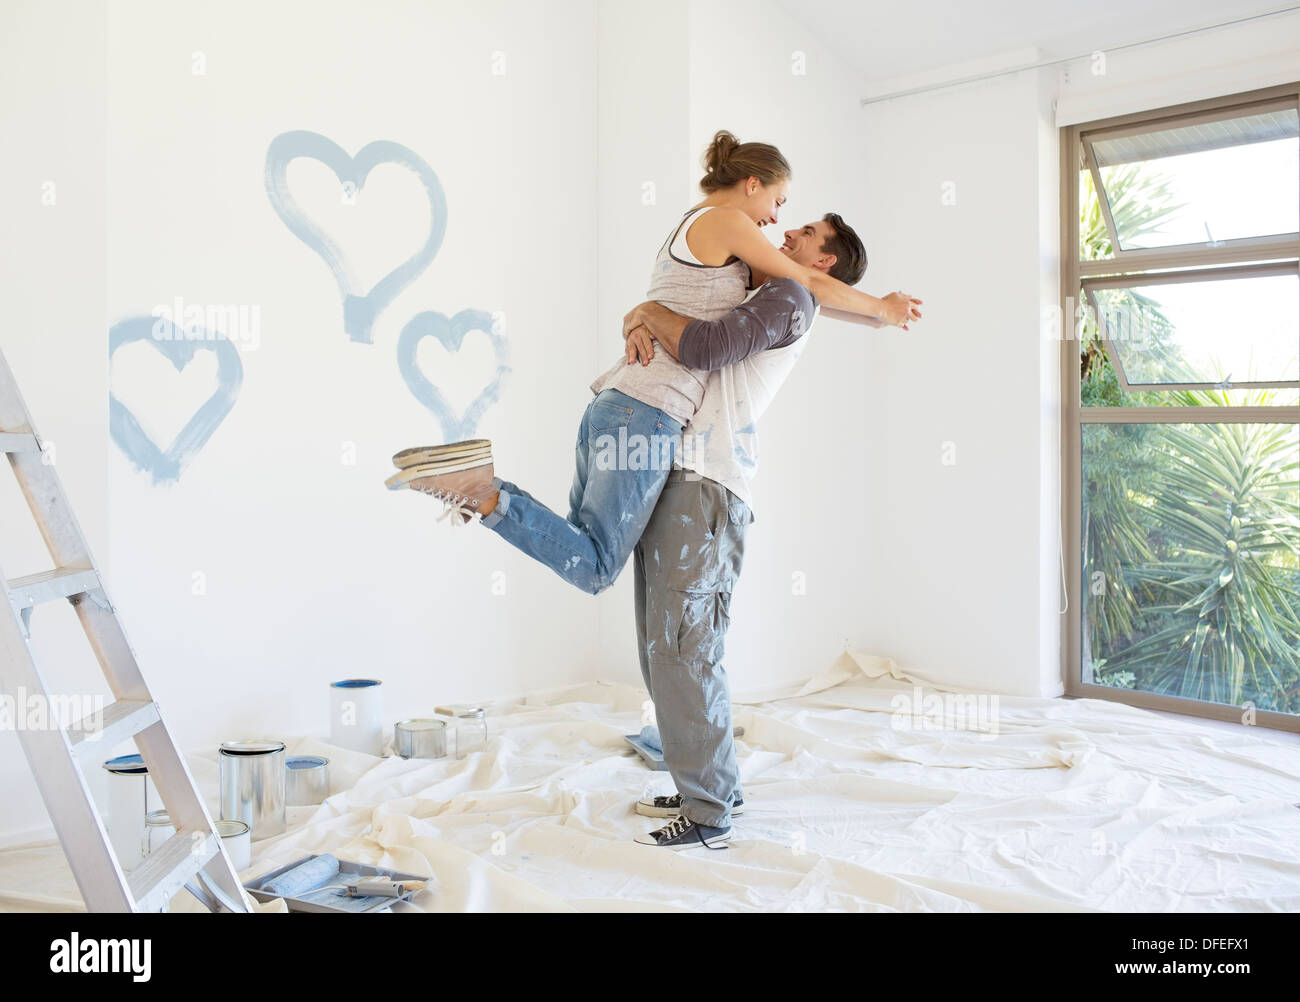 Couple painting blue hearts on wall Banque D'Images